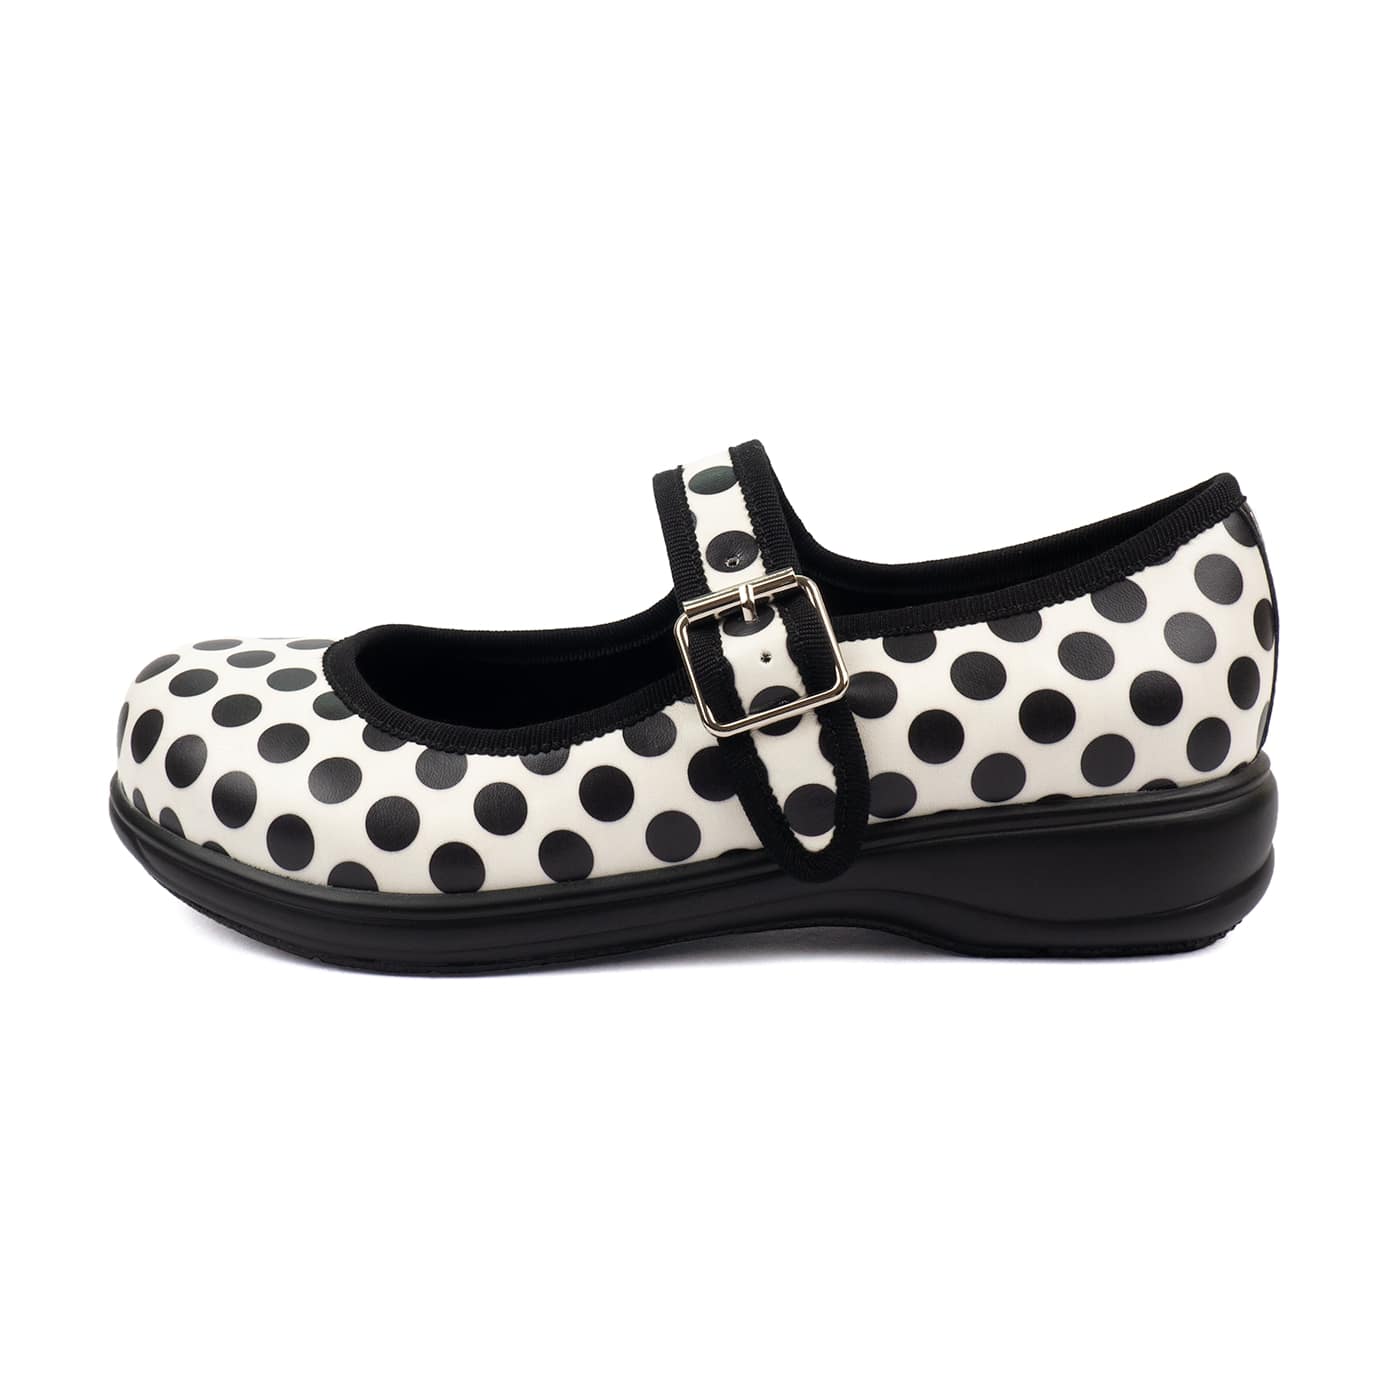 Monochrome Mary Janes by RainbowsAndFairies.com (Black & White - Polka Dots - Stripes - Mismatched Shoes - Shoes - Pair & A Spare) - SKU: FW_MARYJ_MONOC_ORG - Pic 06